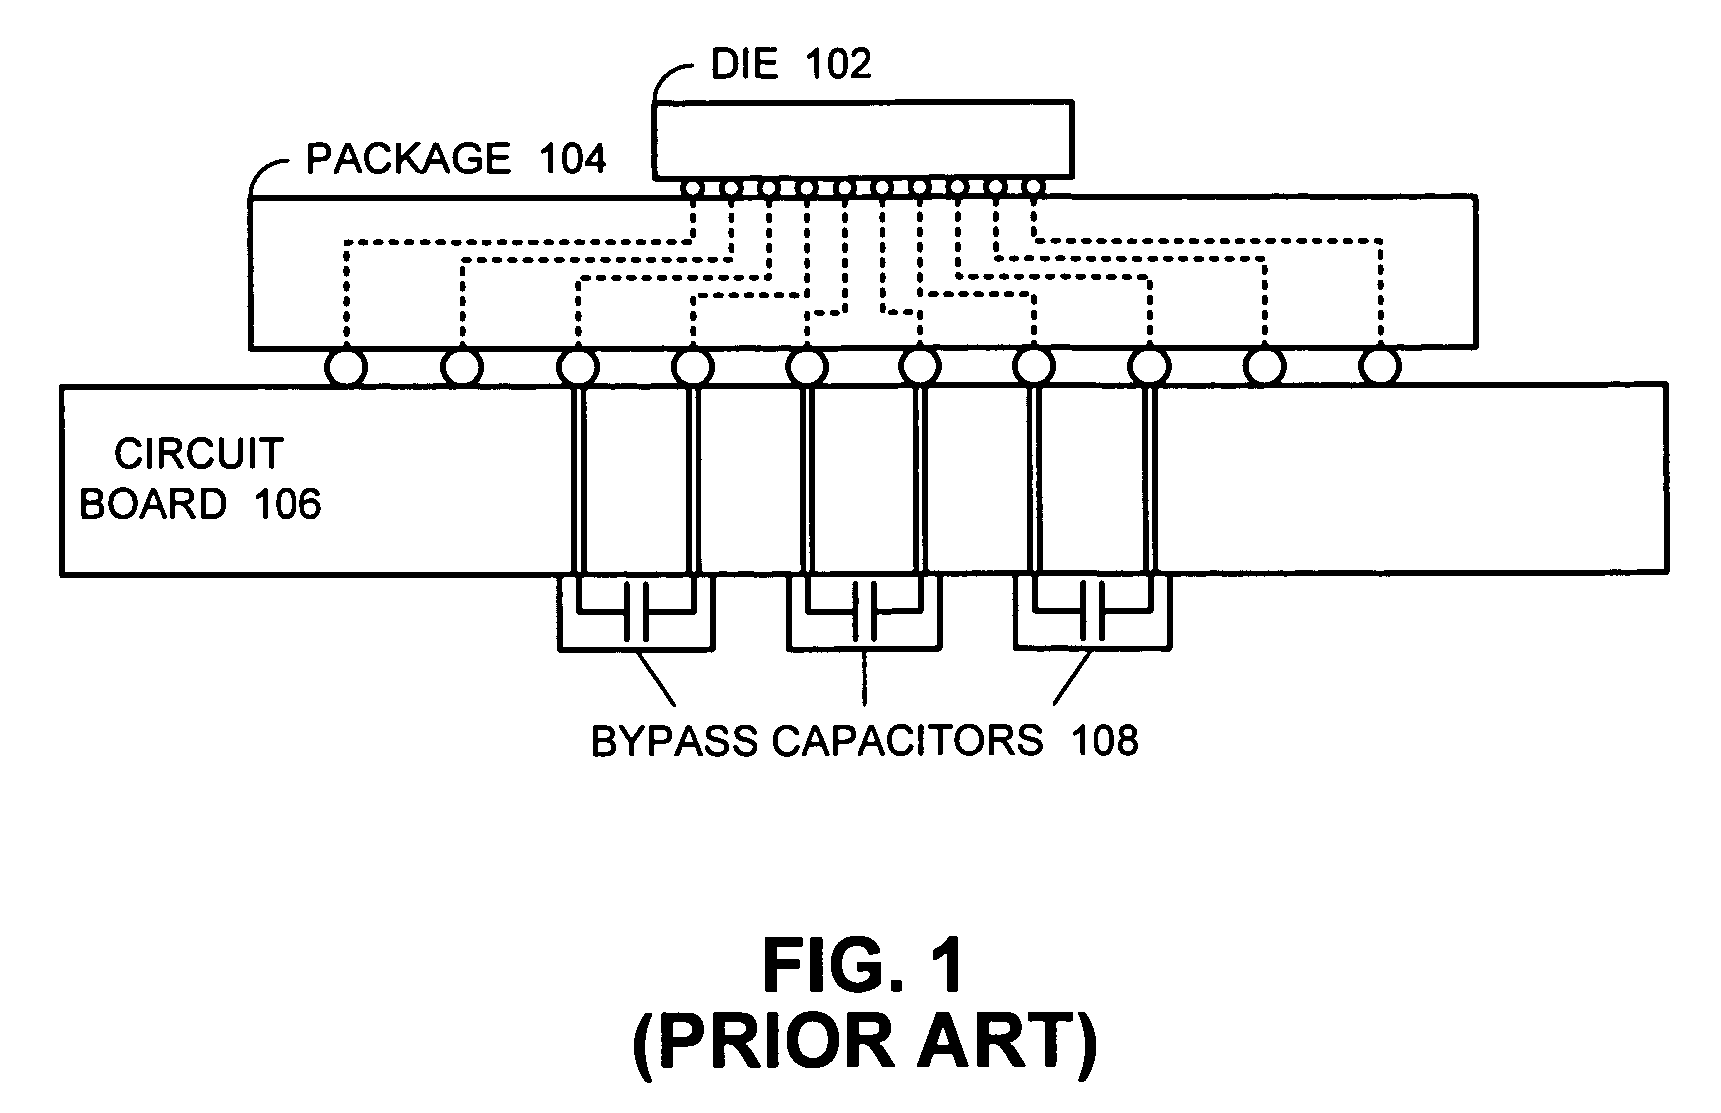 Semiconductor die package with internal bypass capacitors